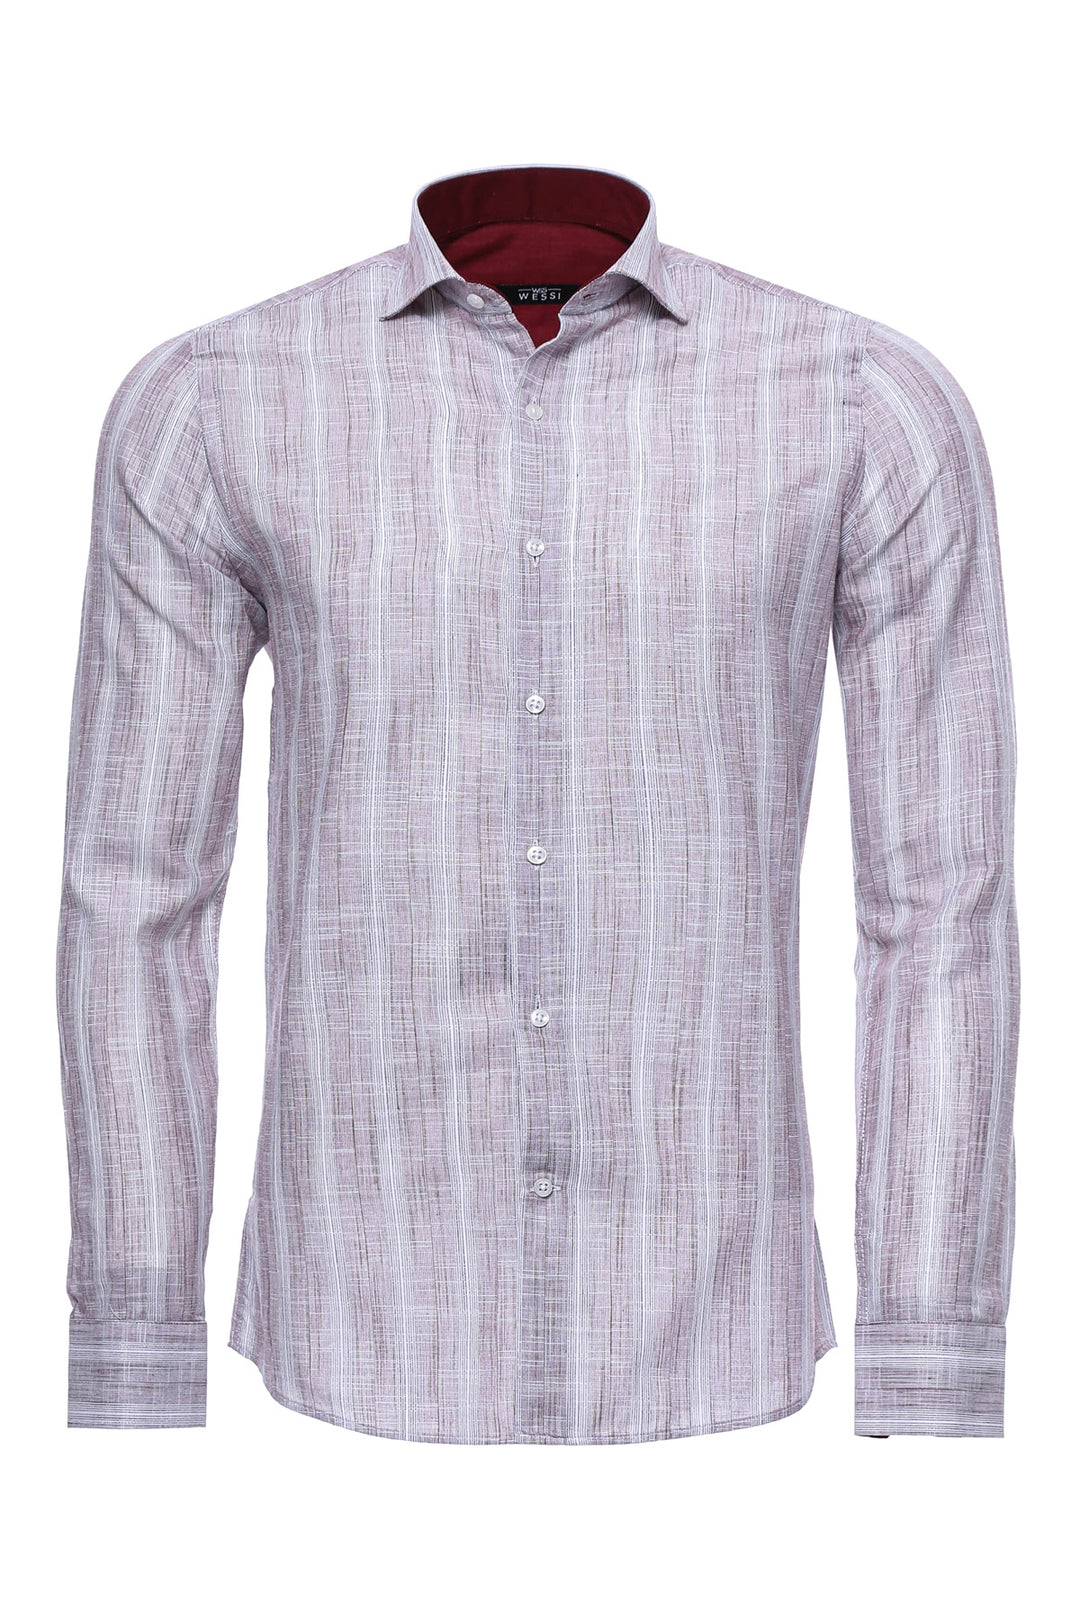 Light Red Checked Shirt - Wessi